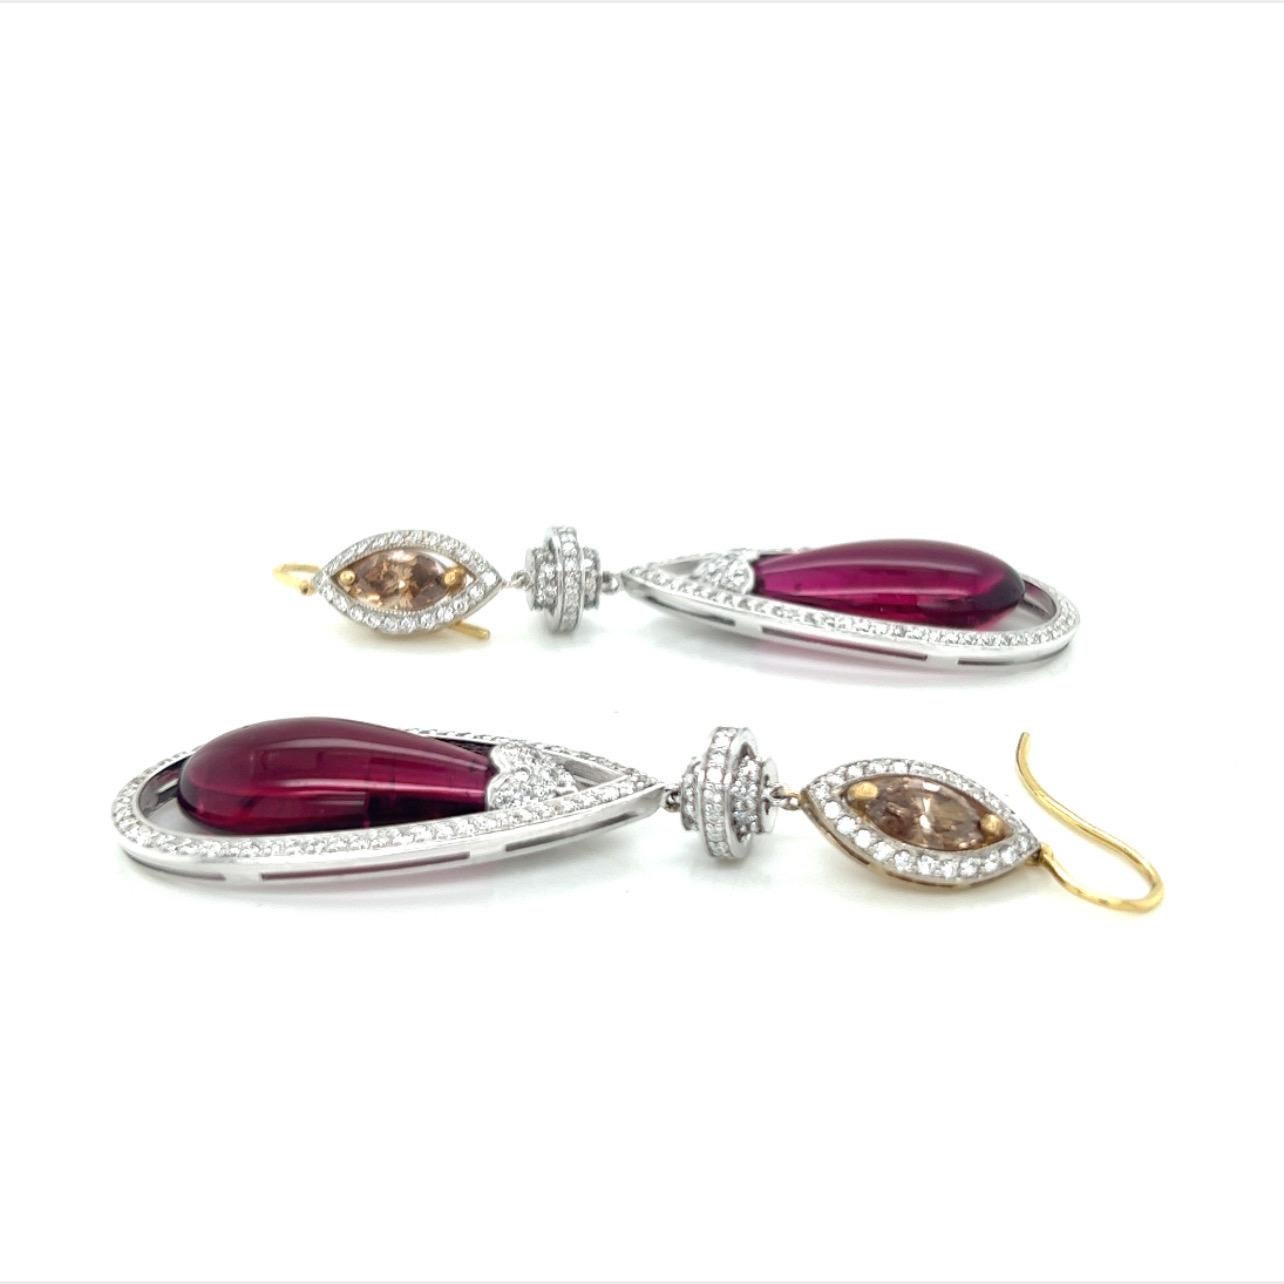 Approx. 20cts Drop Rubellite Earrings in 18k White And Yellow Gold with White and Bronze Diamonds.
One of a kind. 